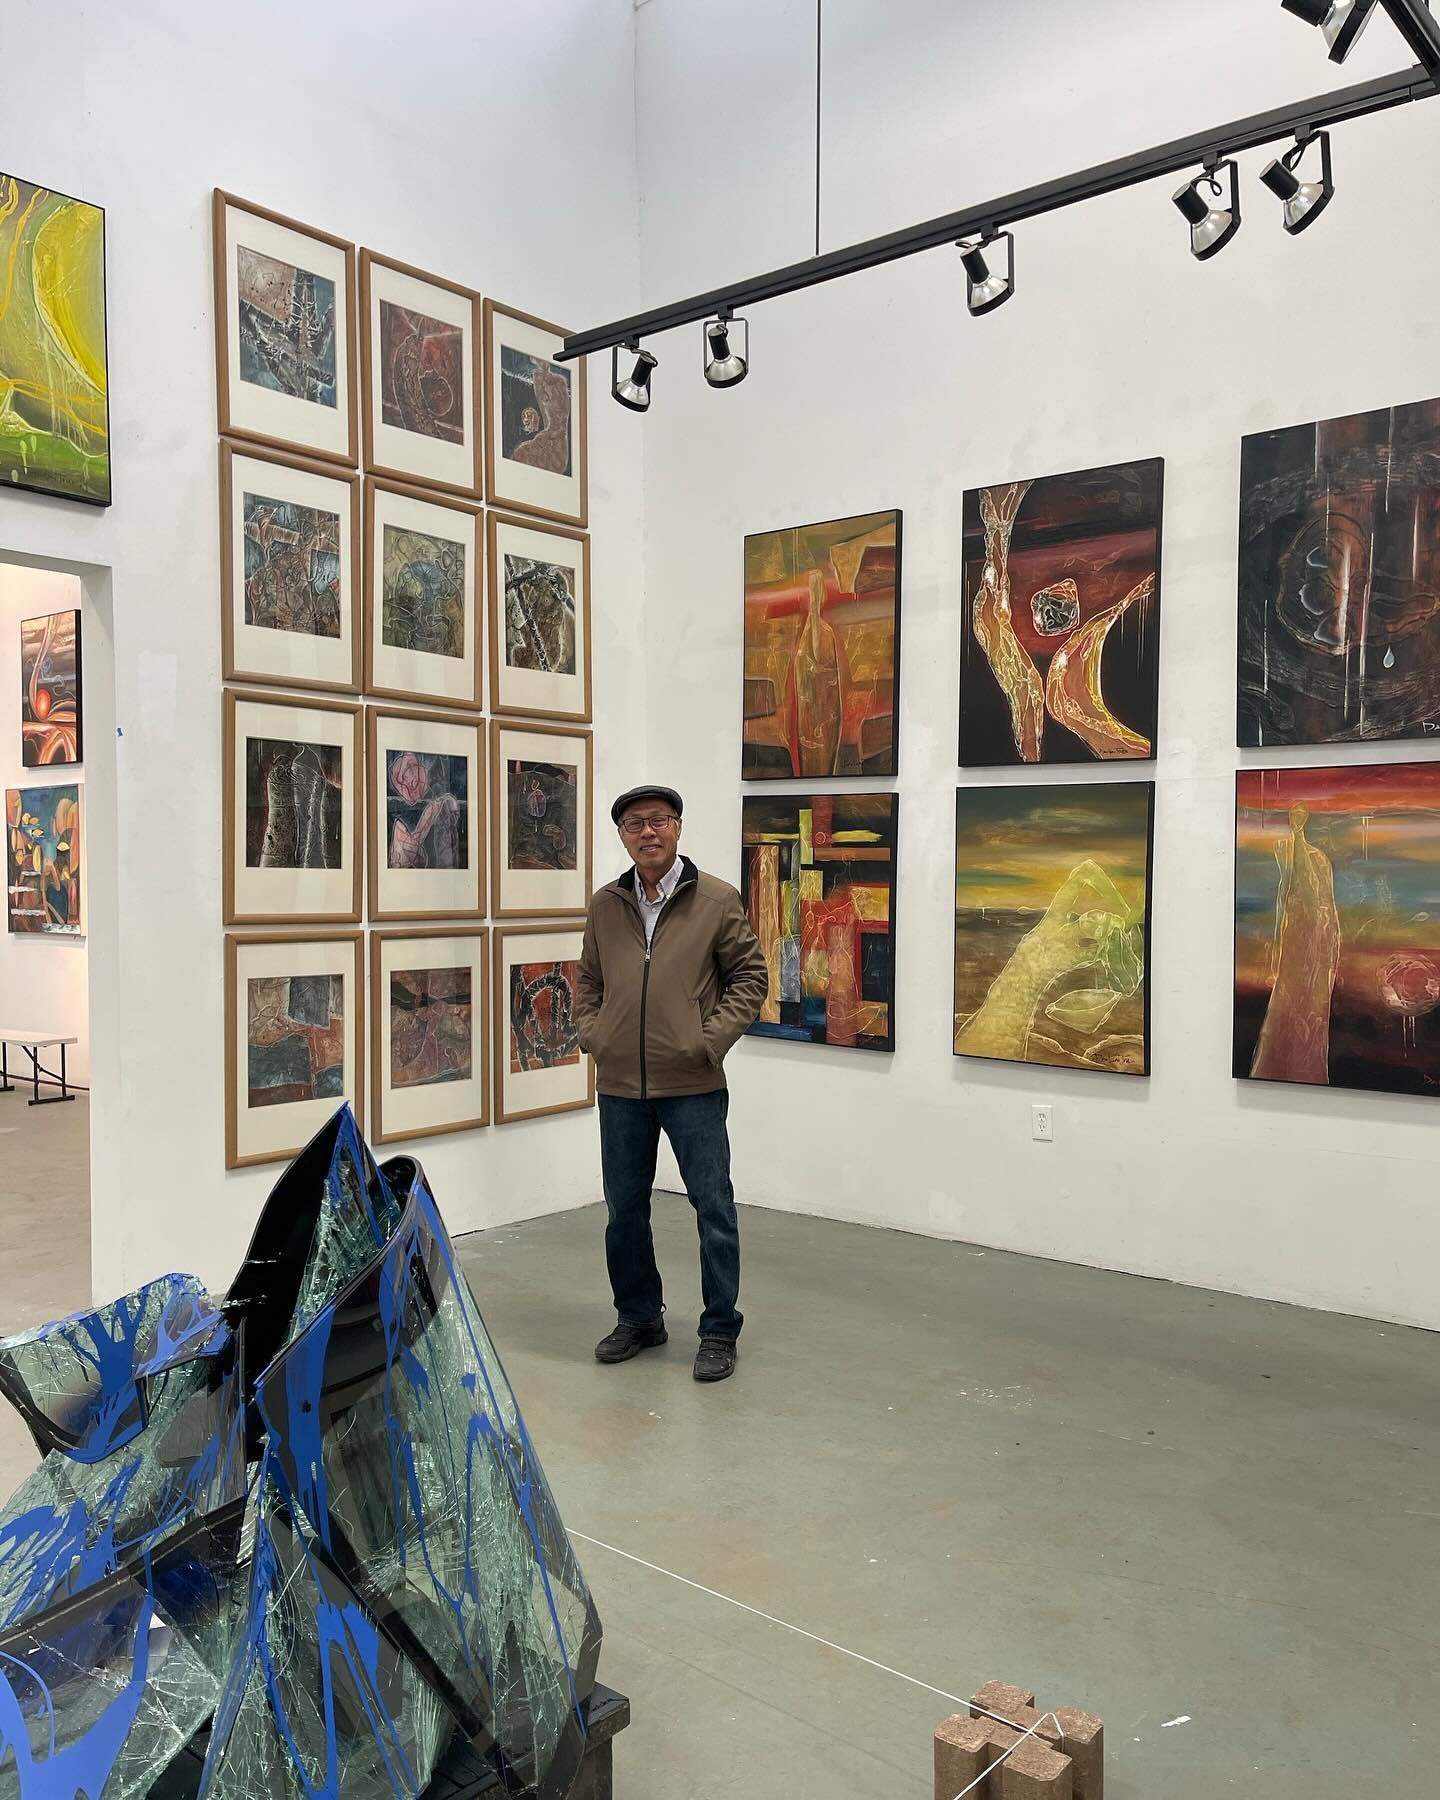 💫You&rsquo;re invited! Join artist
Trieu Dao @trieuhaidao 
on his solo exhibition 

TRANSCENDING 

Opening Reception 
April 20th at 2 PM 

📍Citadel Gallery 
199 Martha Street 
SJ 95112

#artcommunity #southbayartist #dtsjart #artistssupportingartis